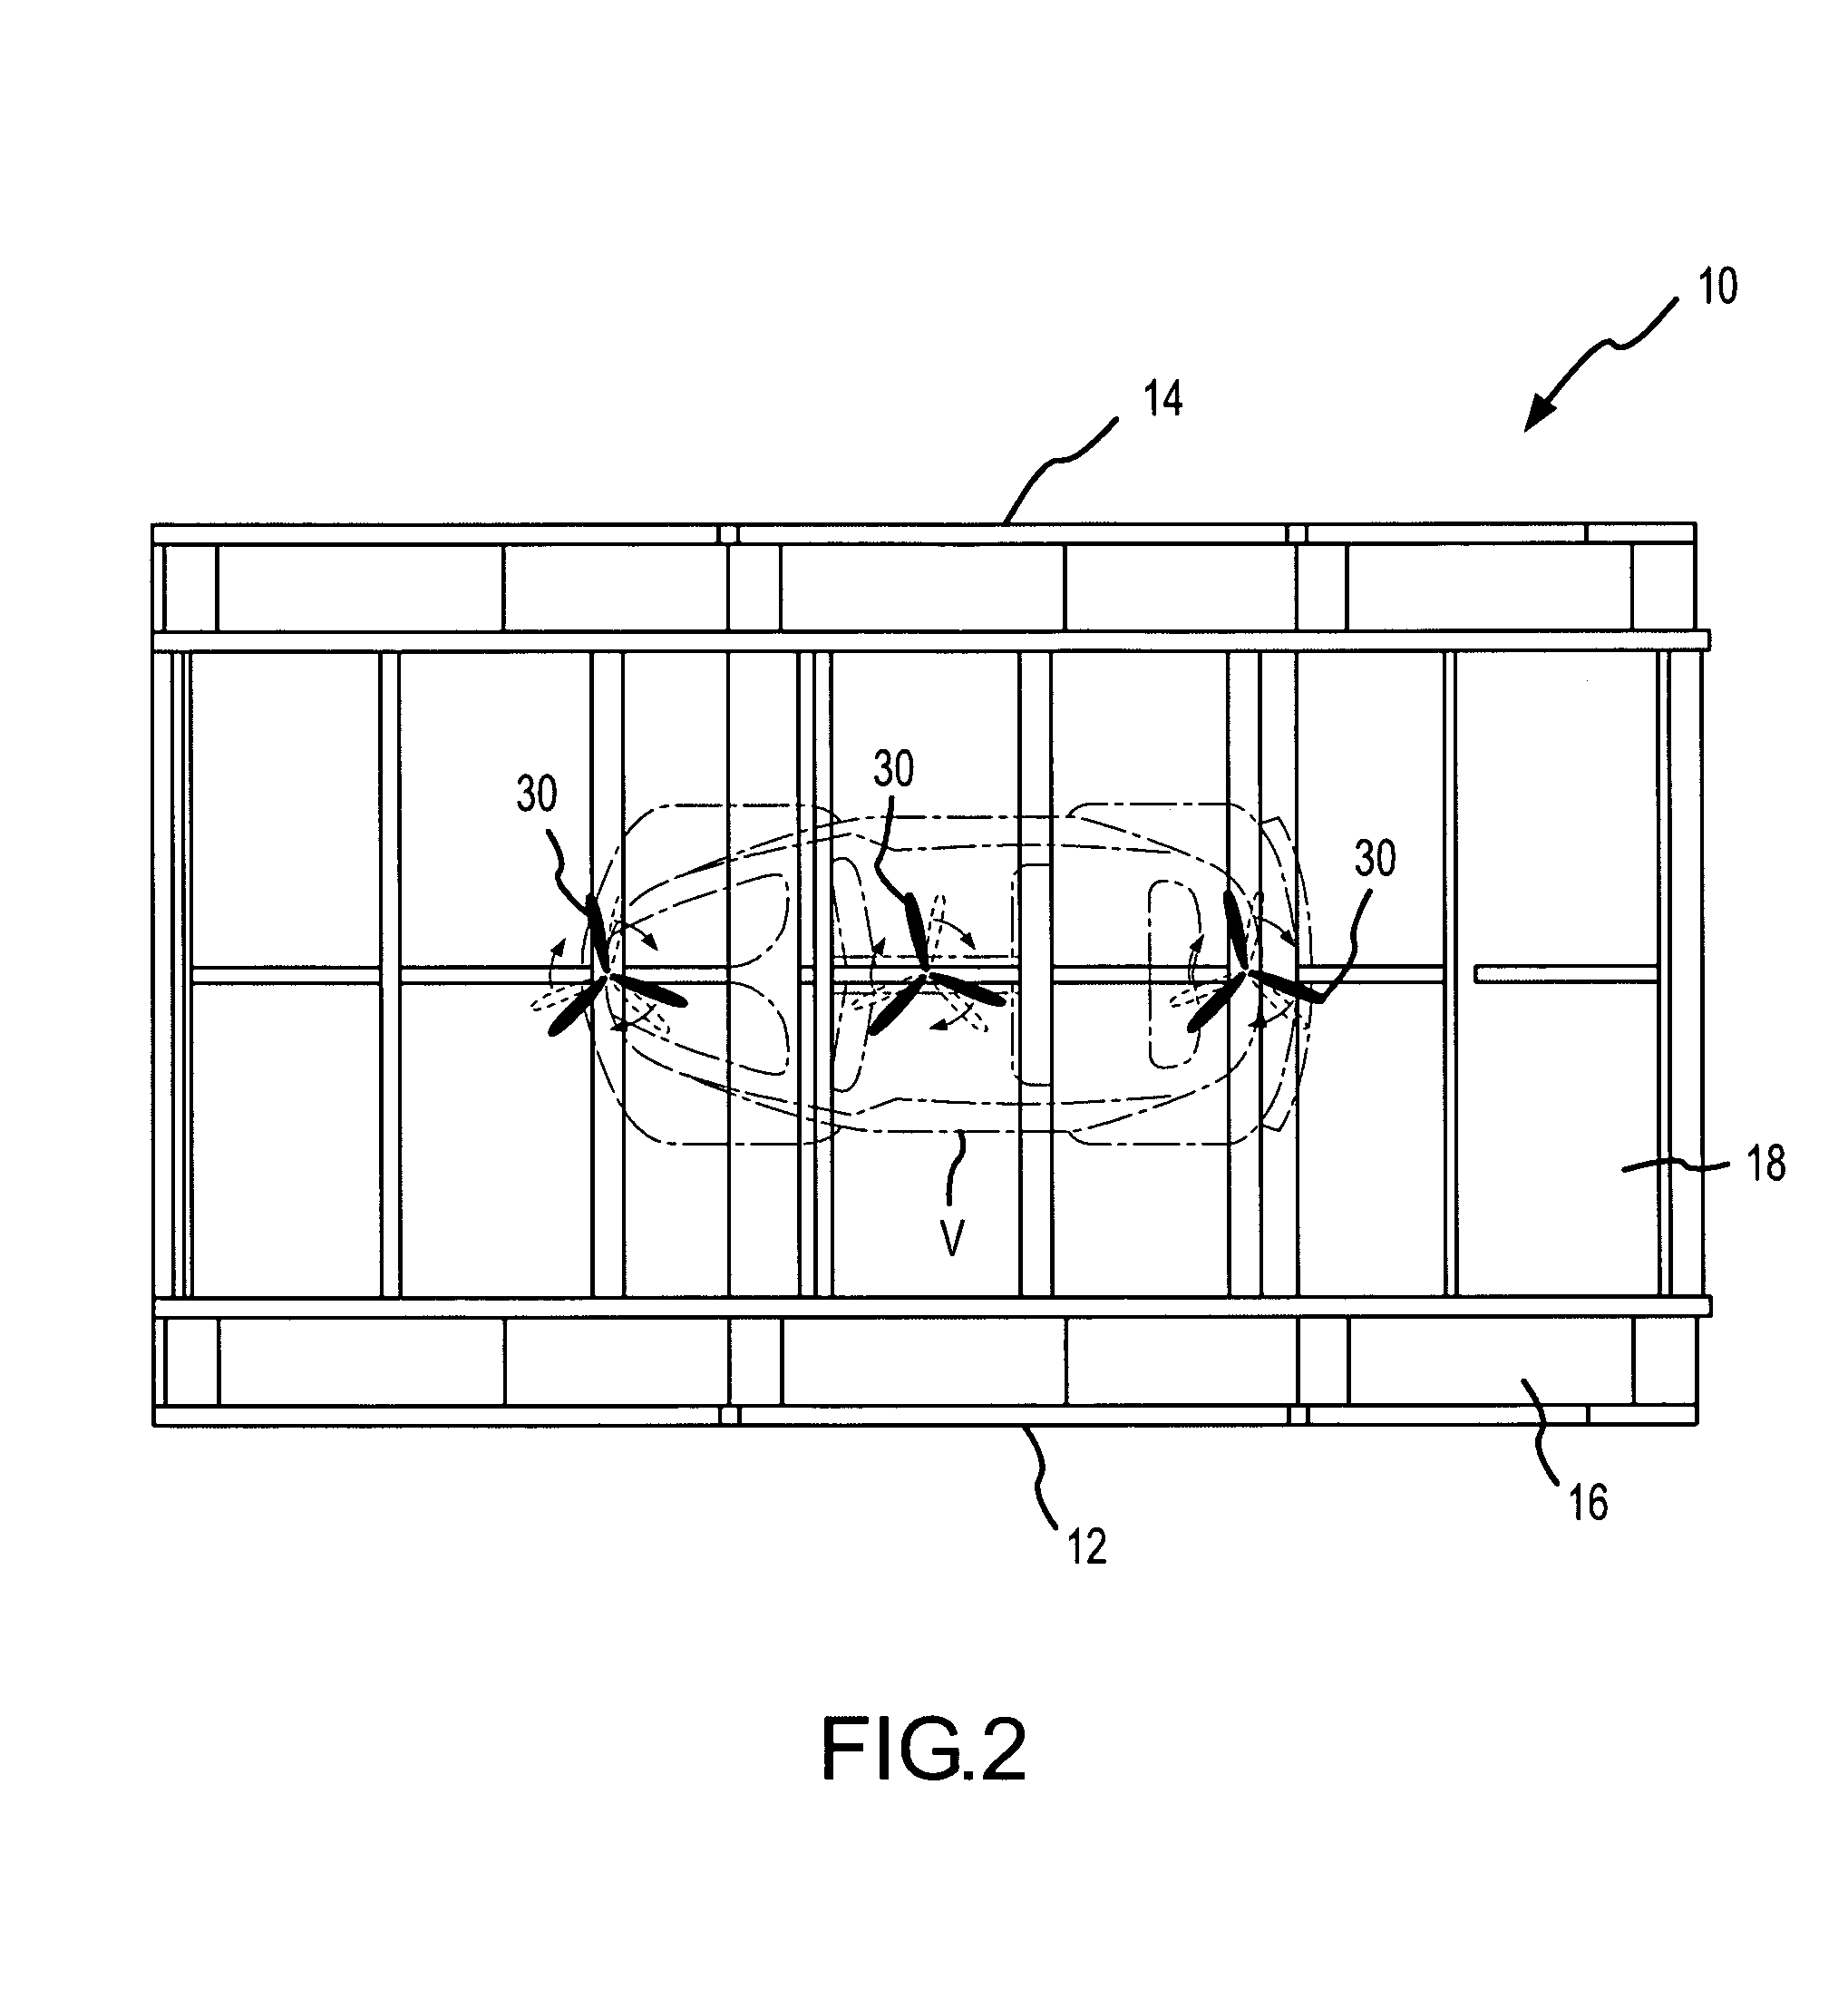 Spray booth systems and methods for accelerating curing times